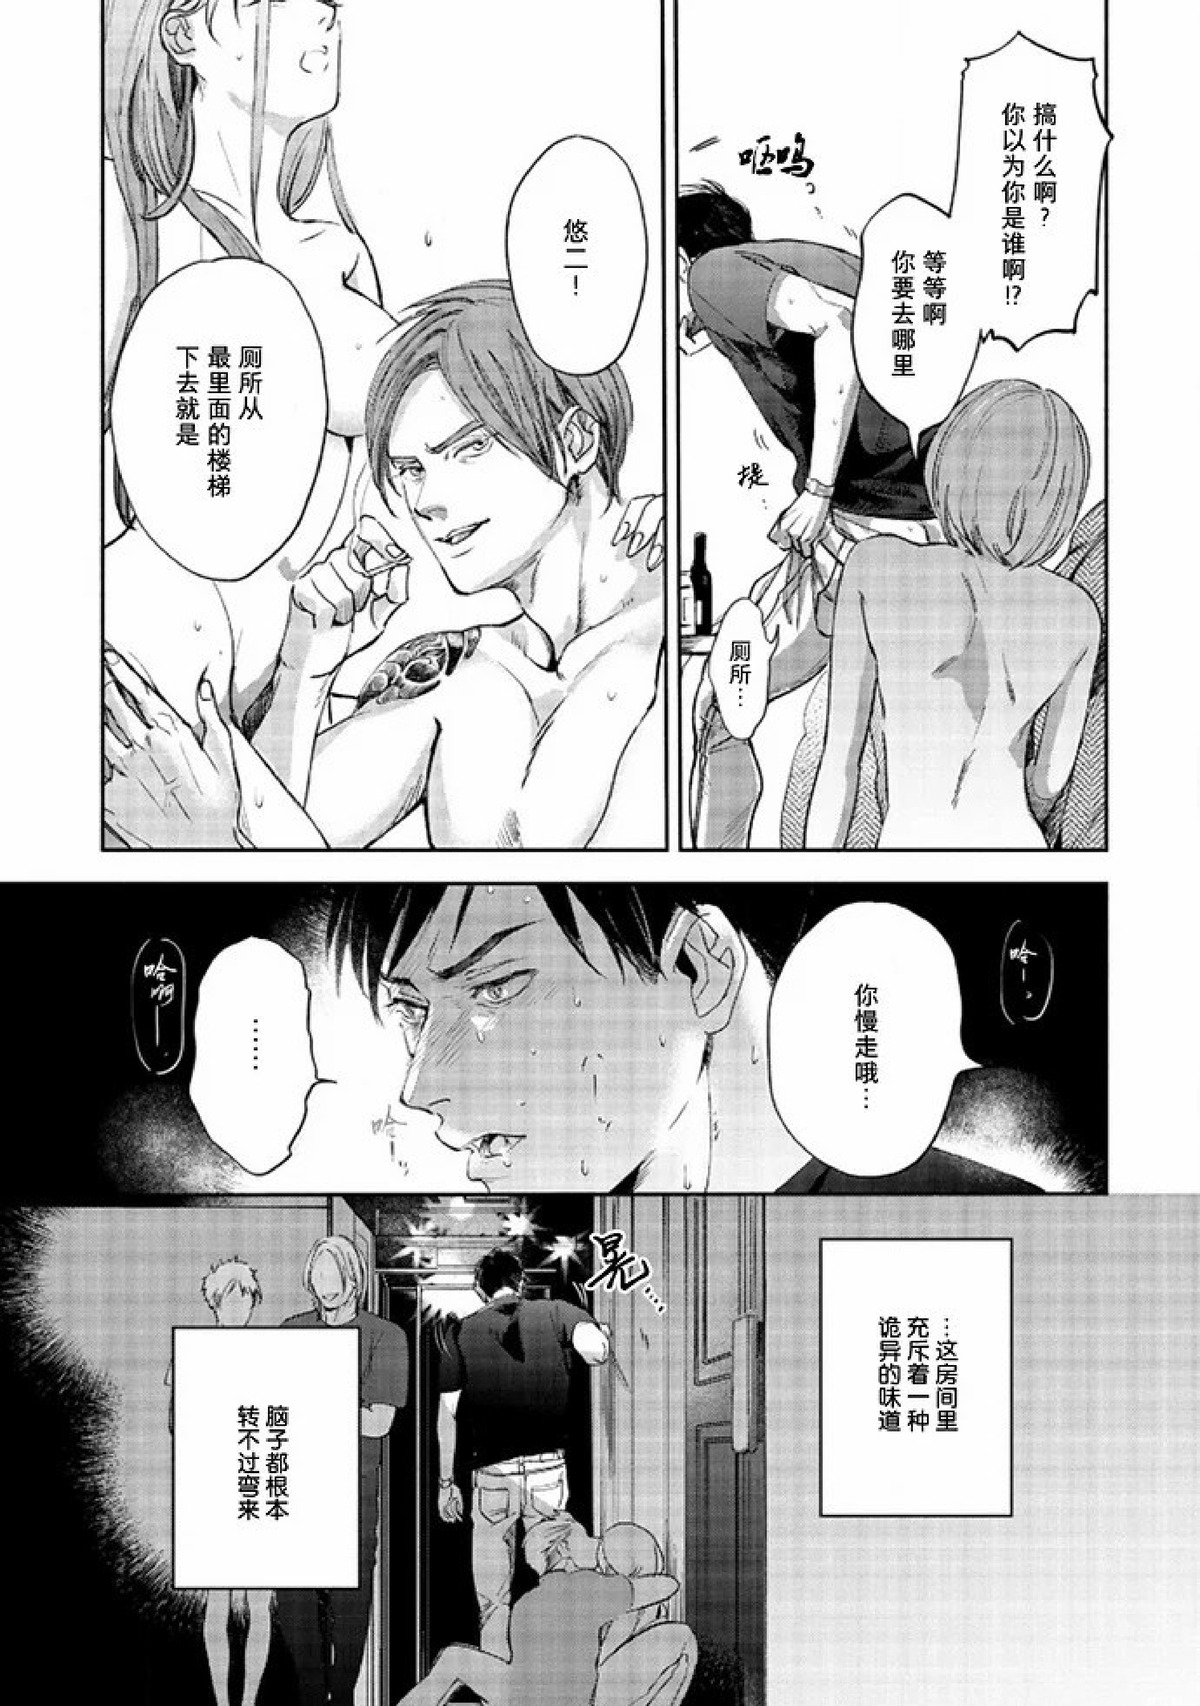 【Two sides of the same coin[腐漫]】漫画-（上卷01-02）章节漫画下拉式图片-47.jpg